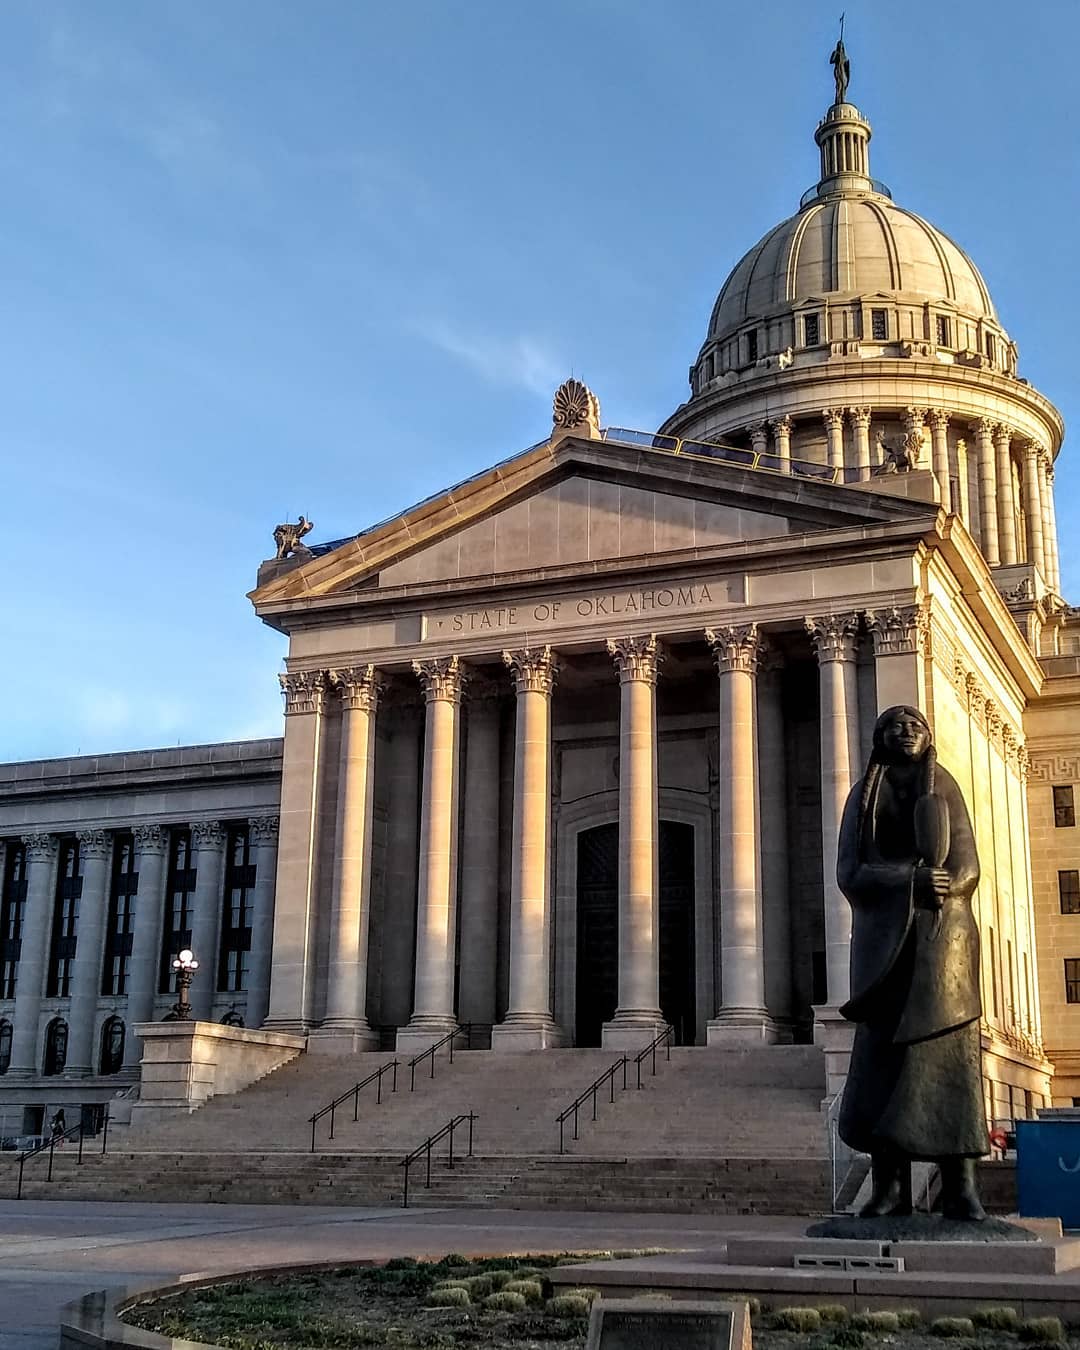 The Oklahoma State Capitol Building in Oklahoma City. Photo by Instagram User @lifeslittebeauty